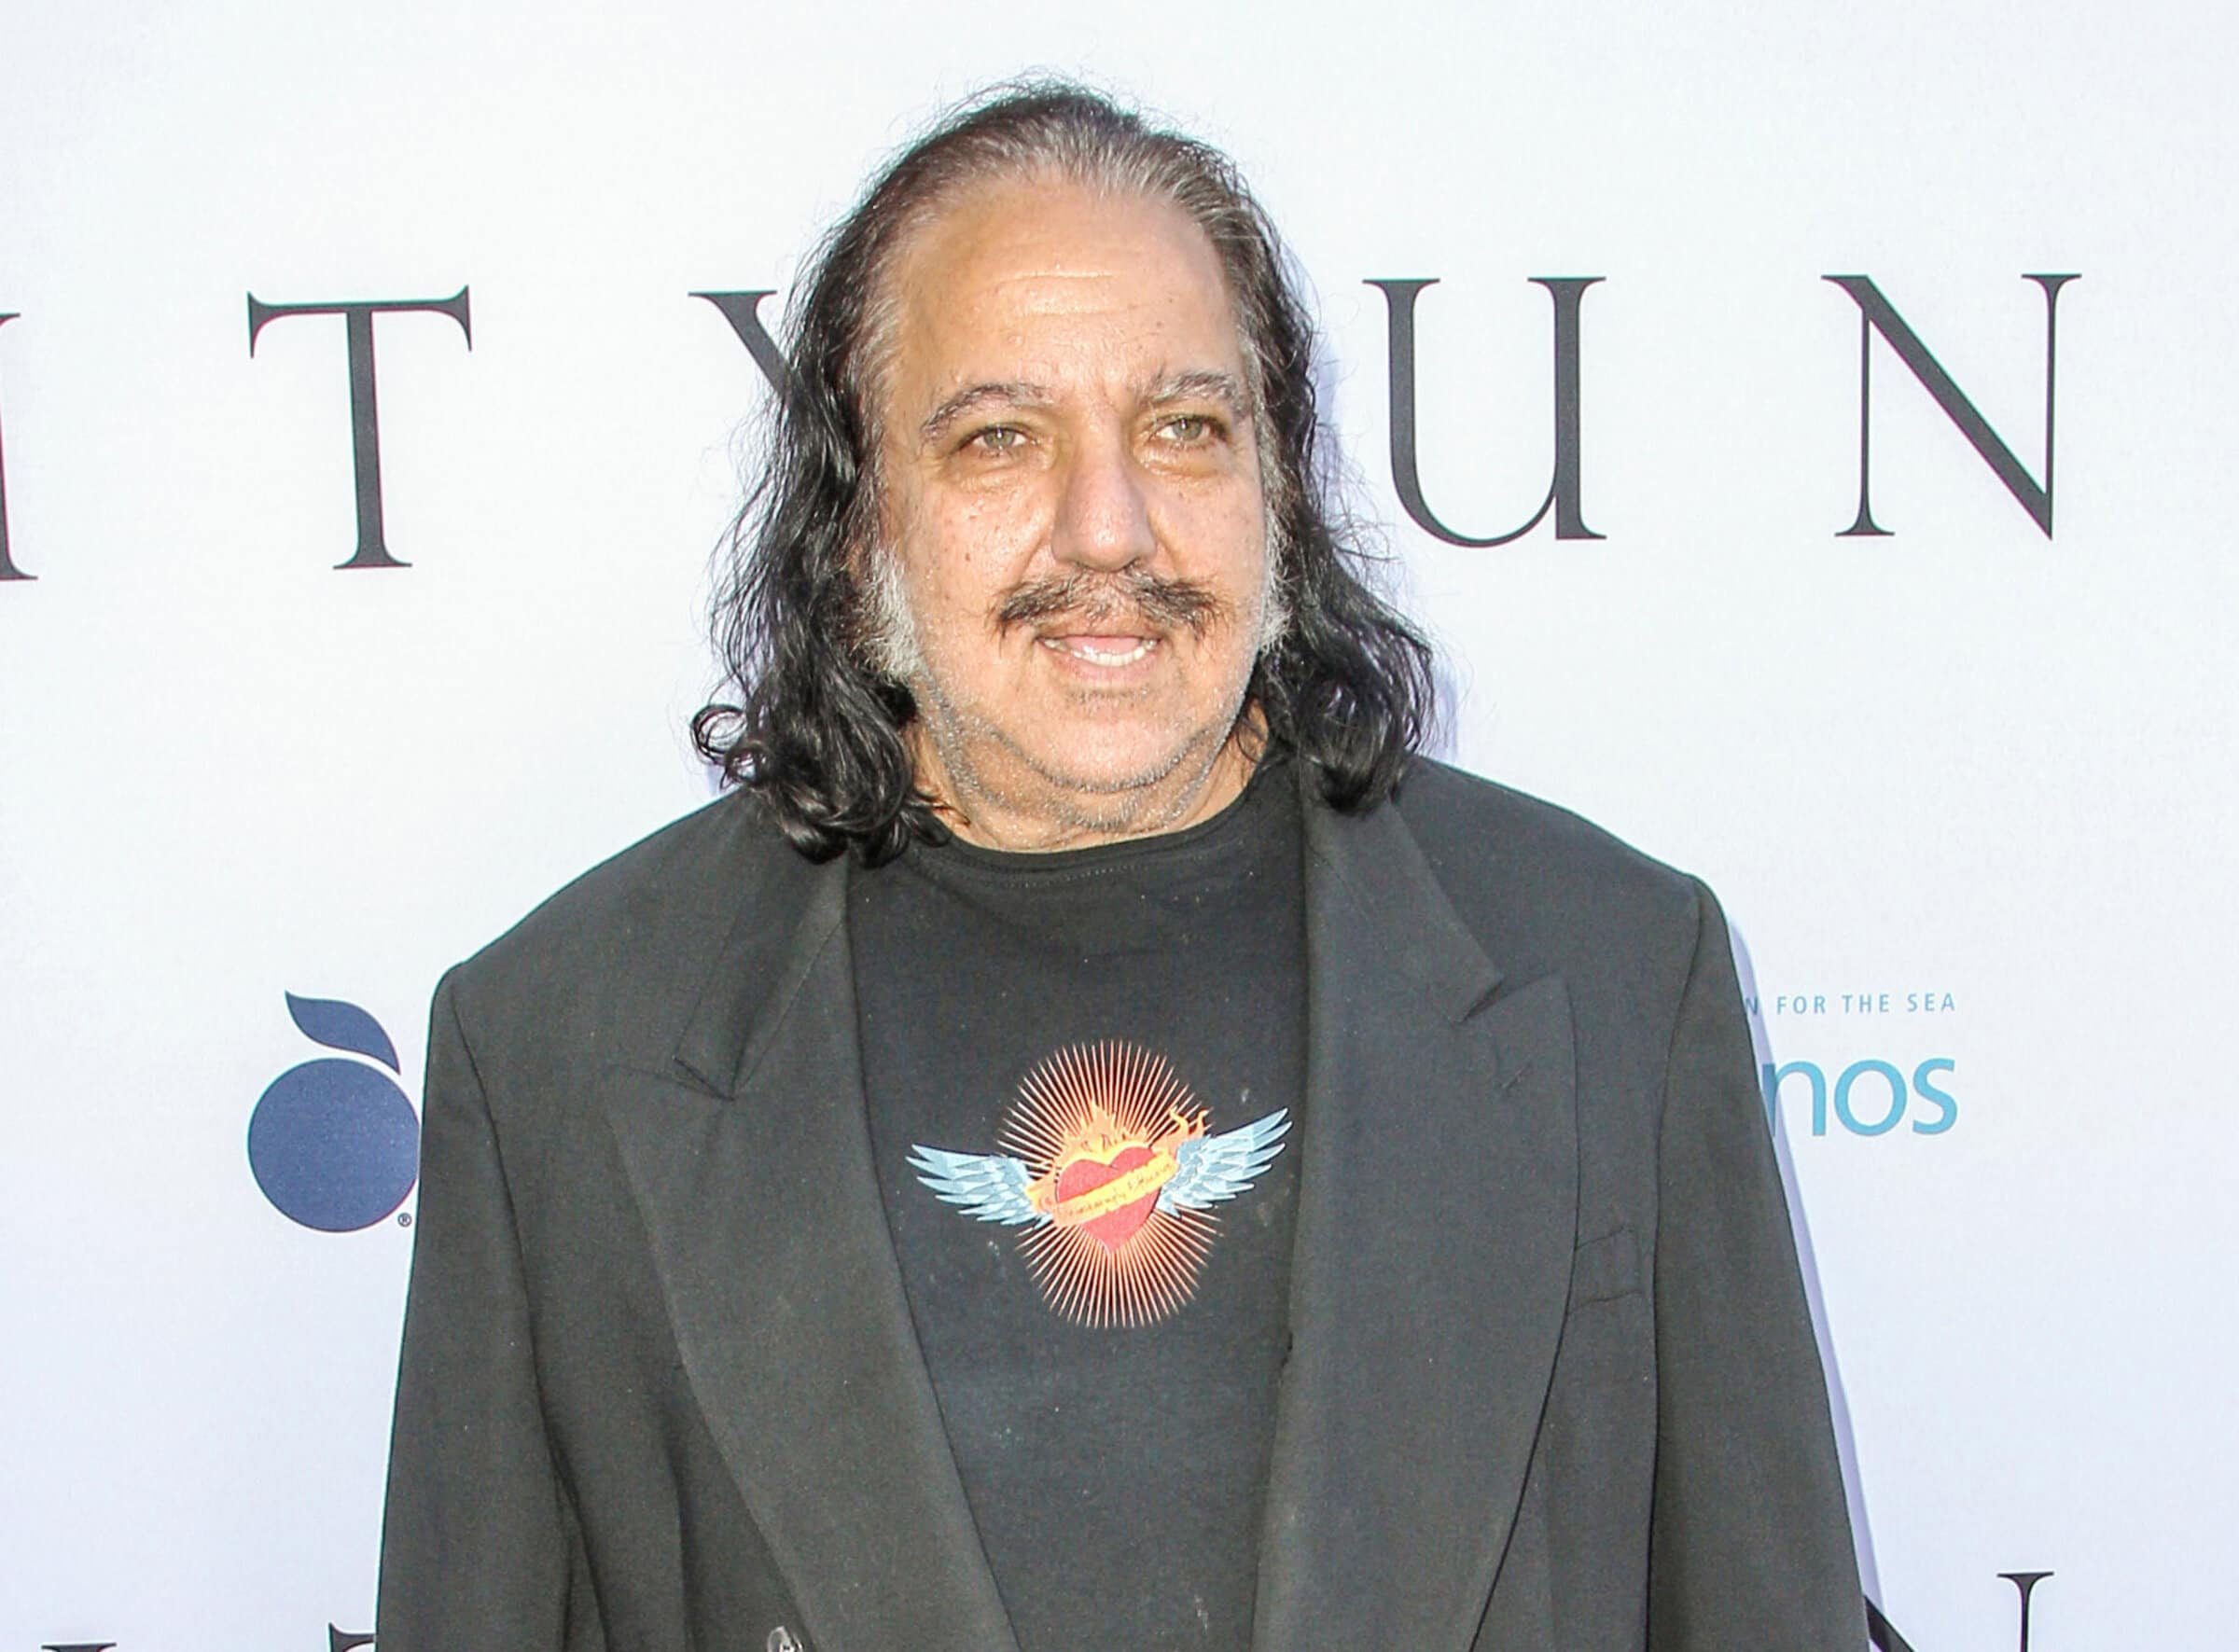 Why is one of the most prolific adult film makers facing multiple sexual assault charges? Join us while we get to know Ron Jeremy, and explore the news!